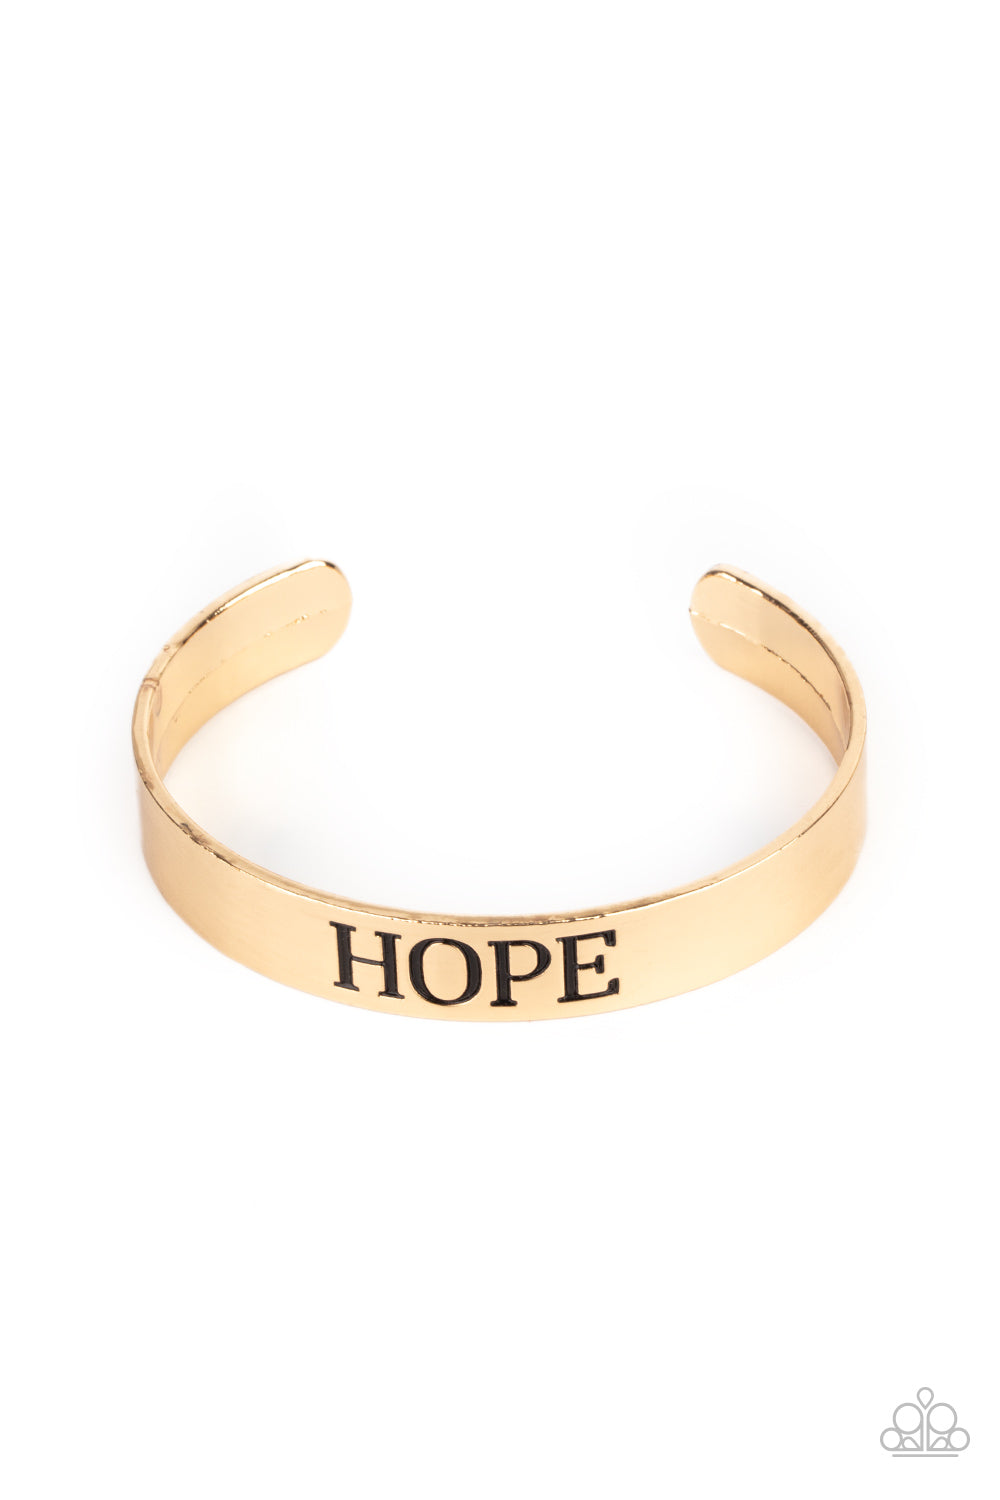 Hope Makes The World Go Round - Gold - Bracelets - Paparazzi Accessories